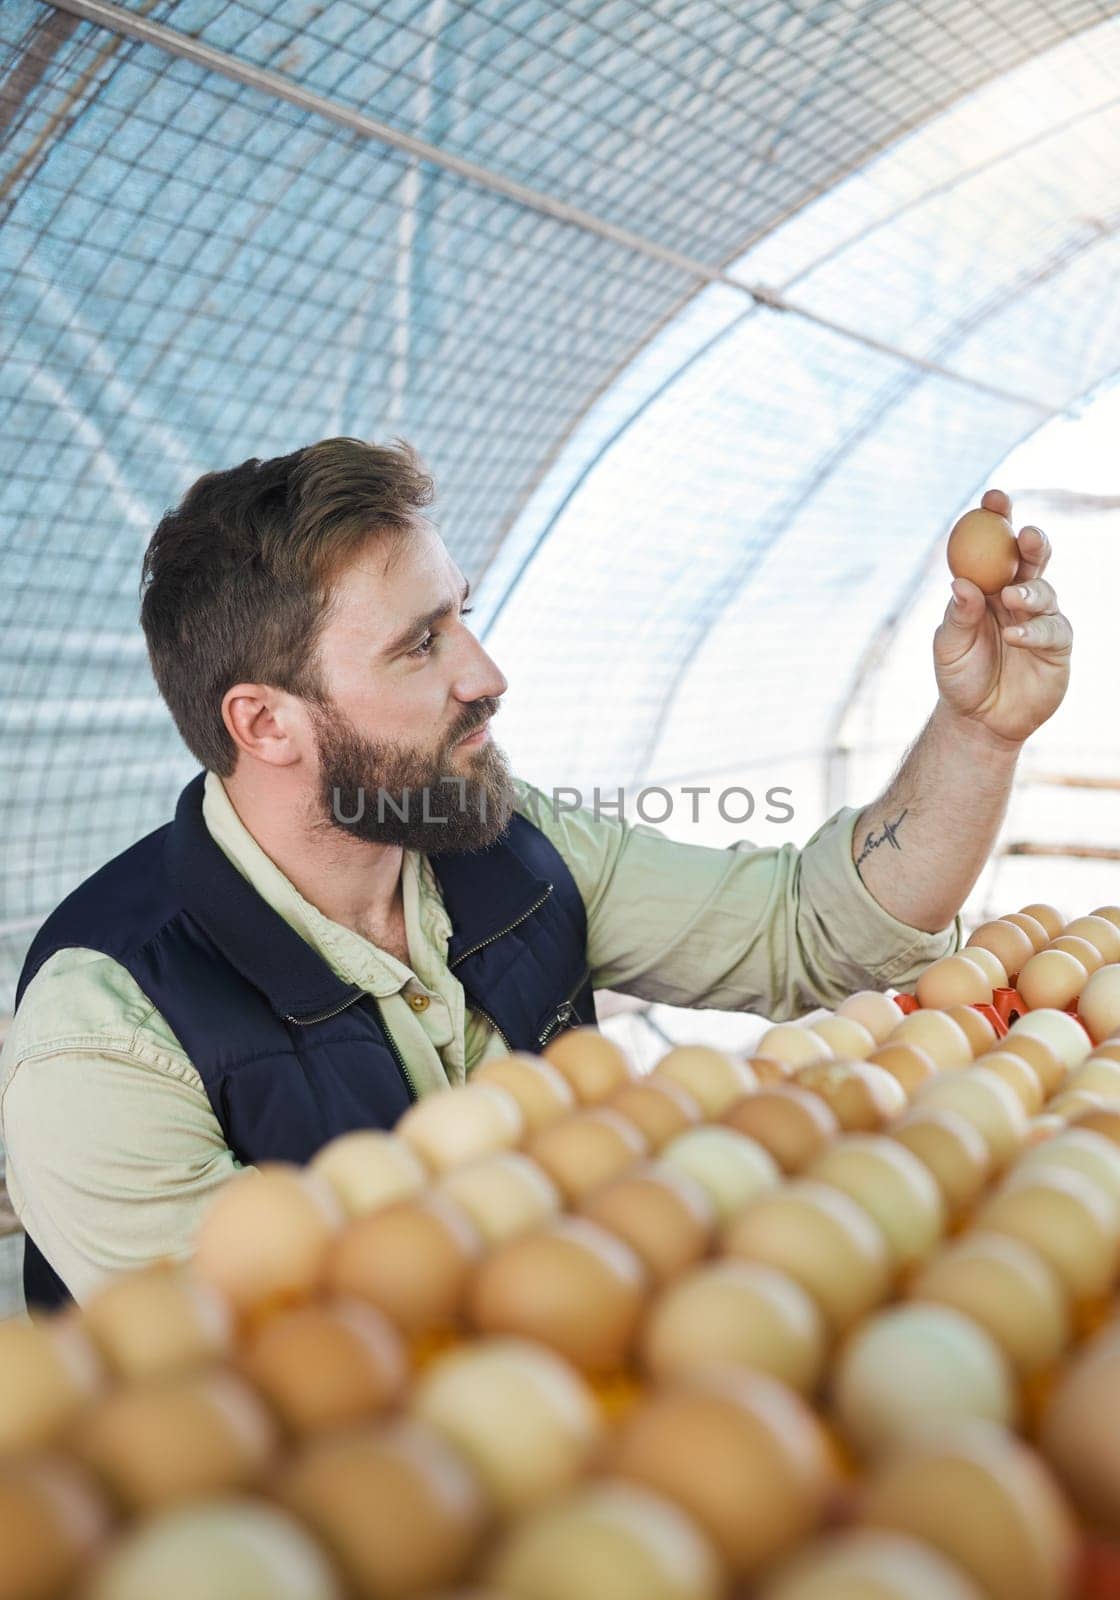 Farm, agriculture and farmer with egg for inspection, growth production and food industry. Poultry farming, countryside and man checking chicken eggs for order, protein market and quality control.